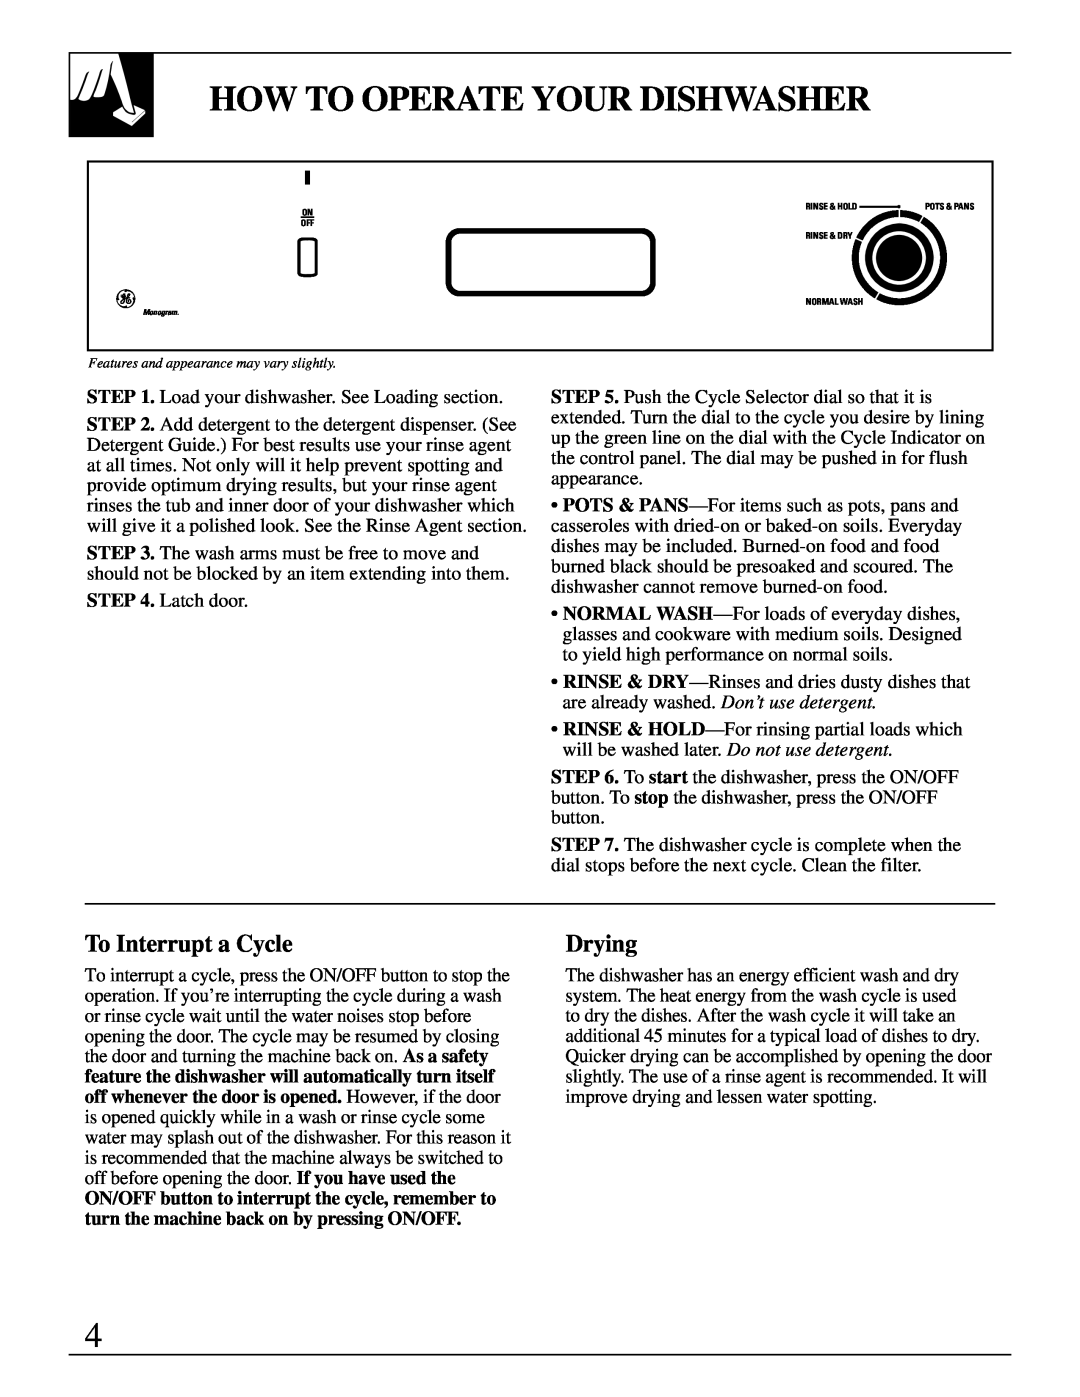 GE Monogram ZBD4600 manual How To Operate Your Dishwasher, To Interrupt a Cycle, Drying 